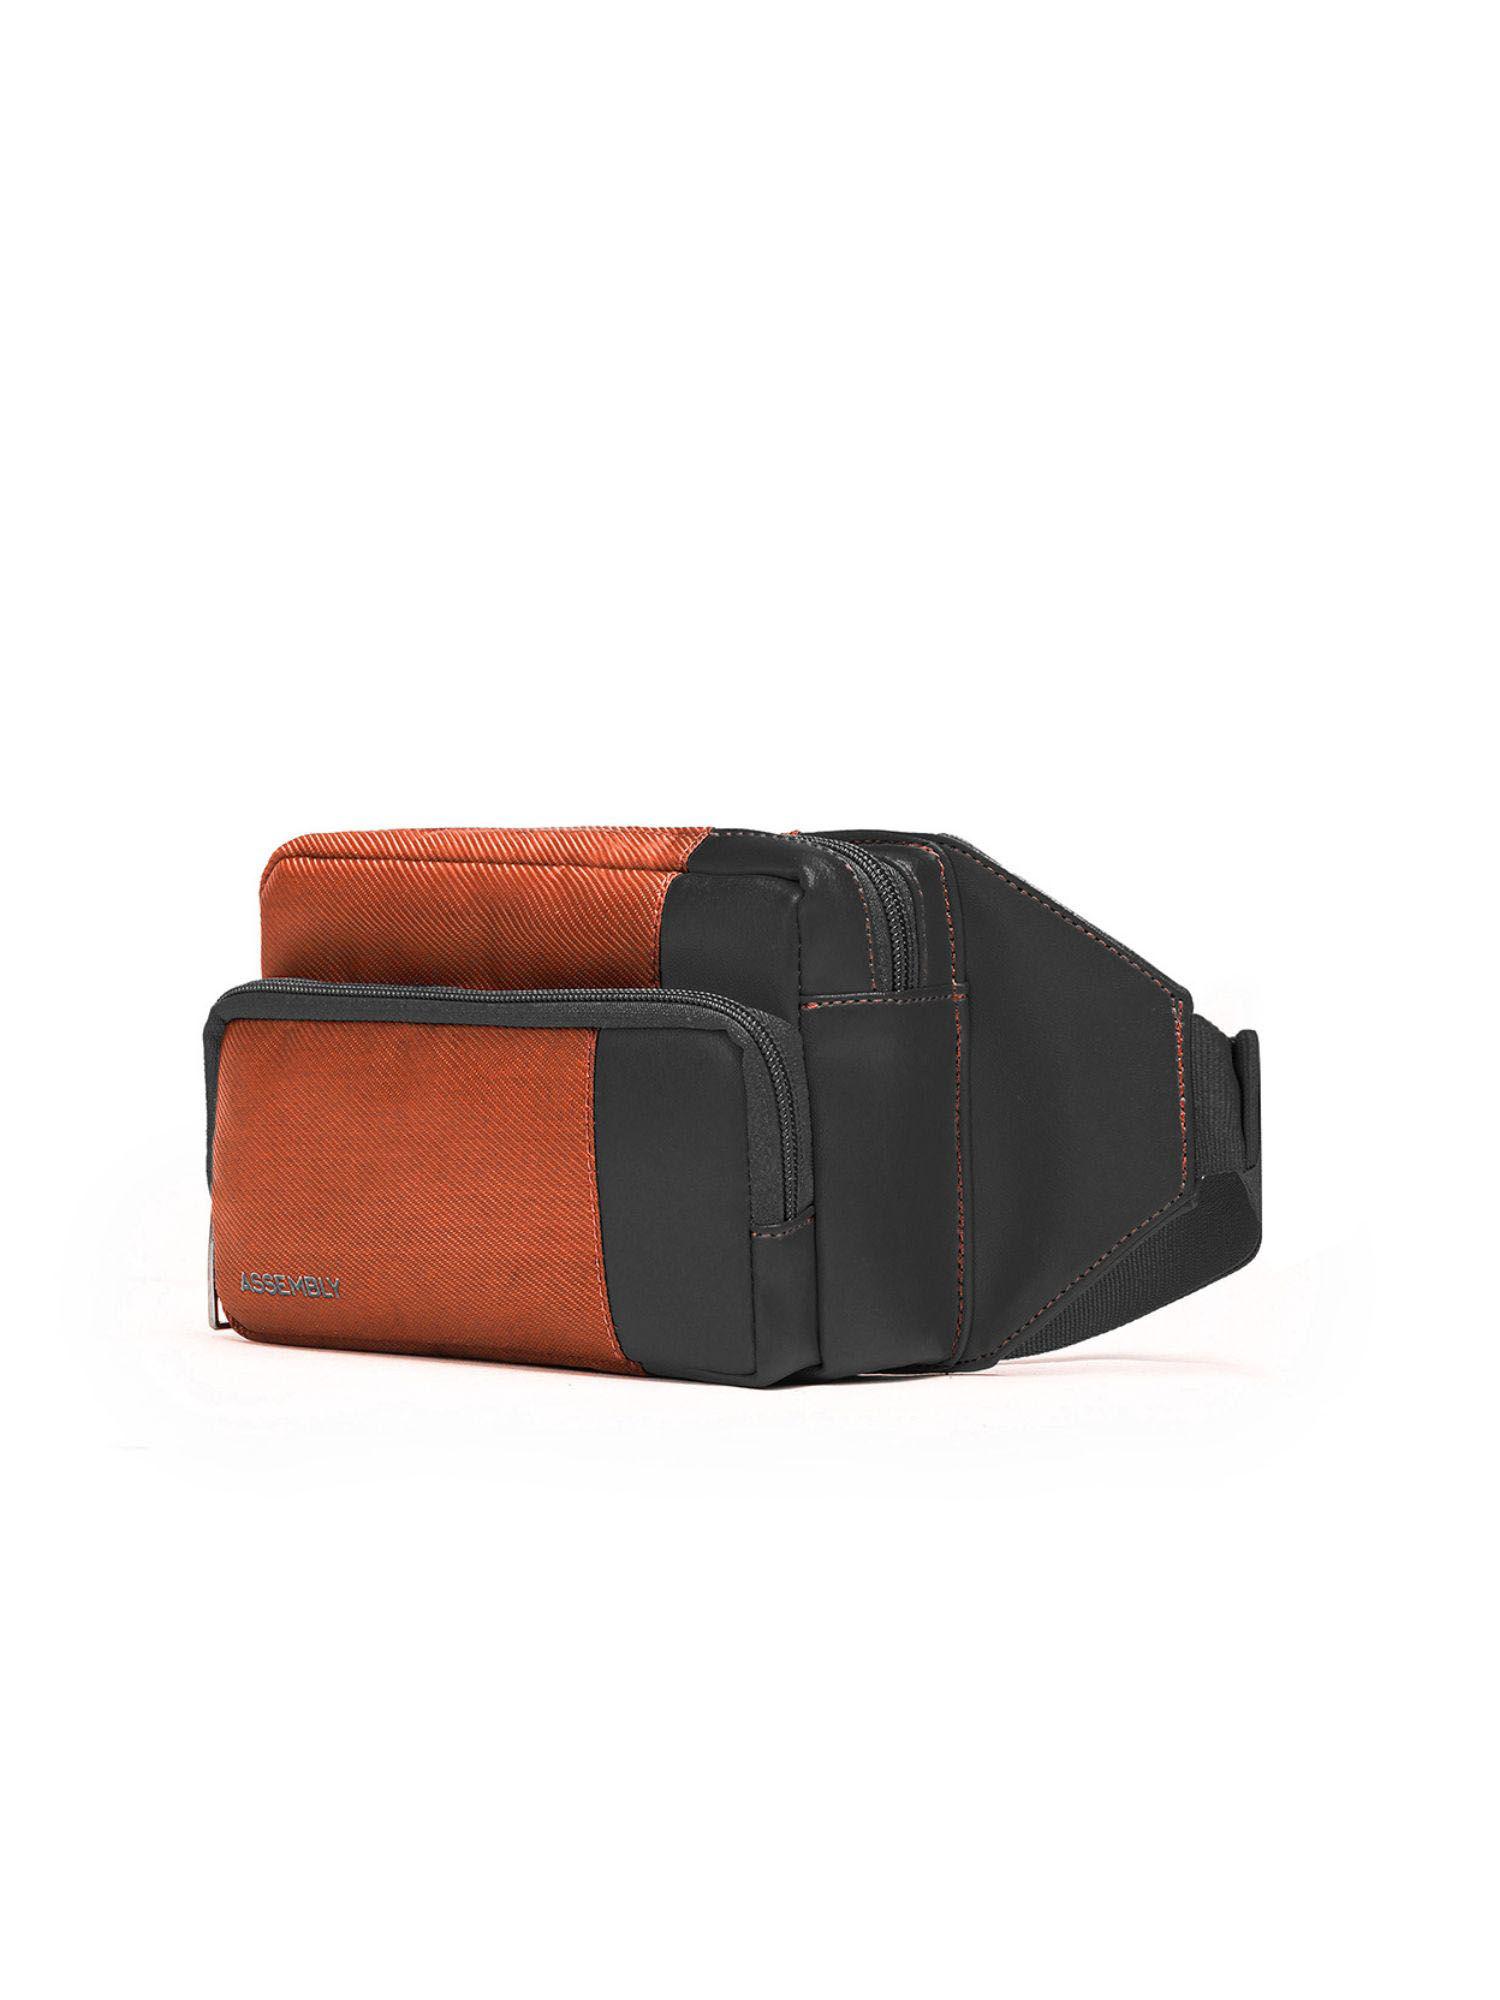 cross body fanny pack with adjustable straps and zipper pockets- rust (s)